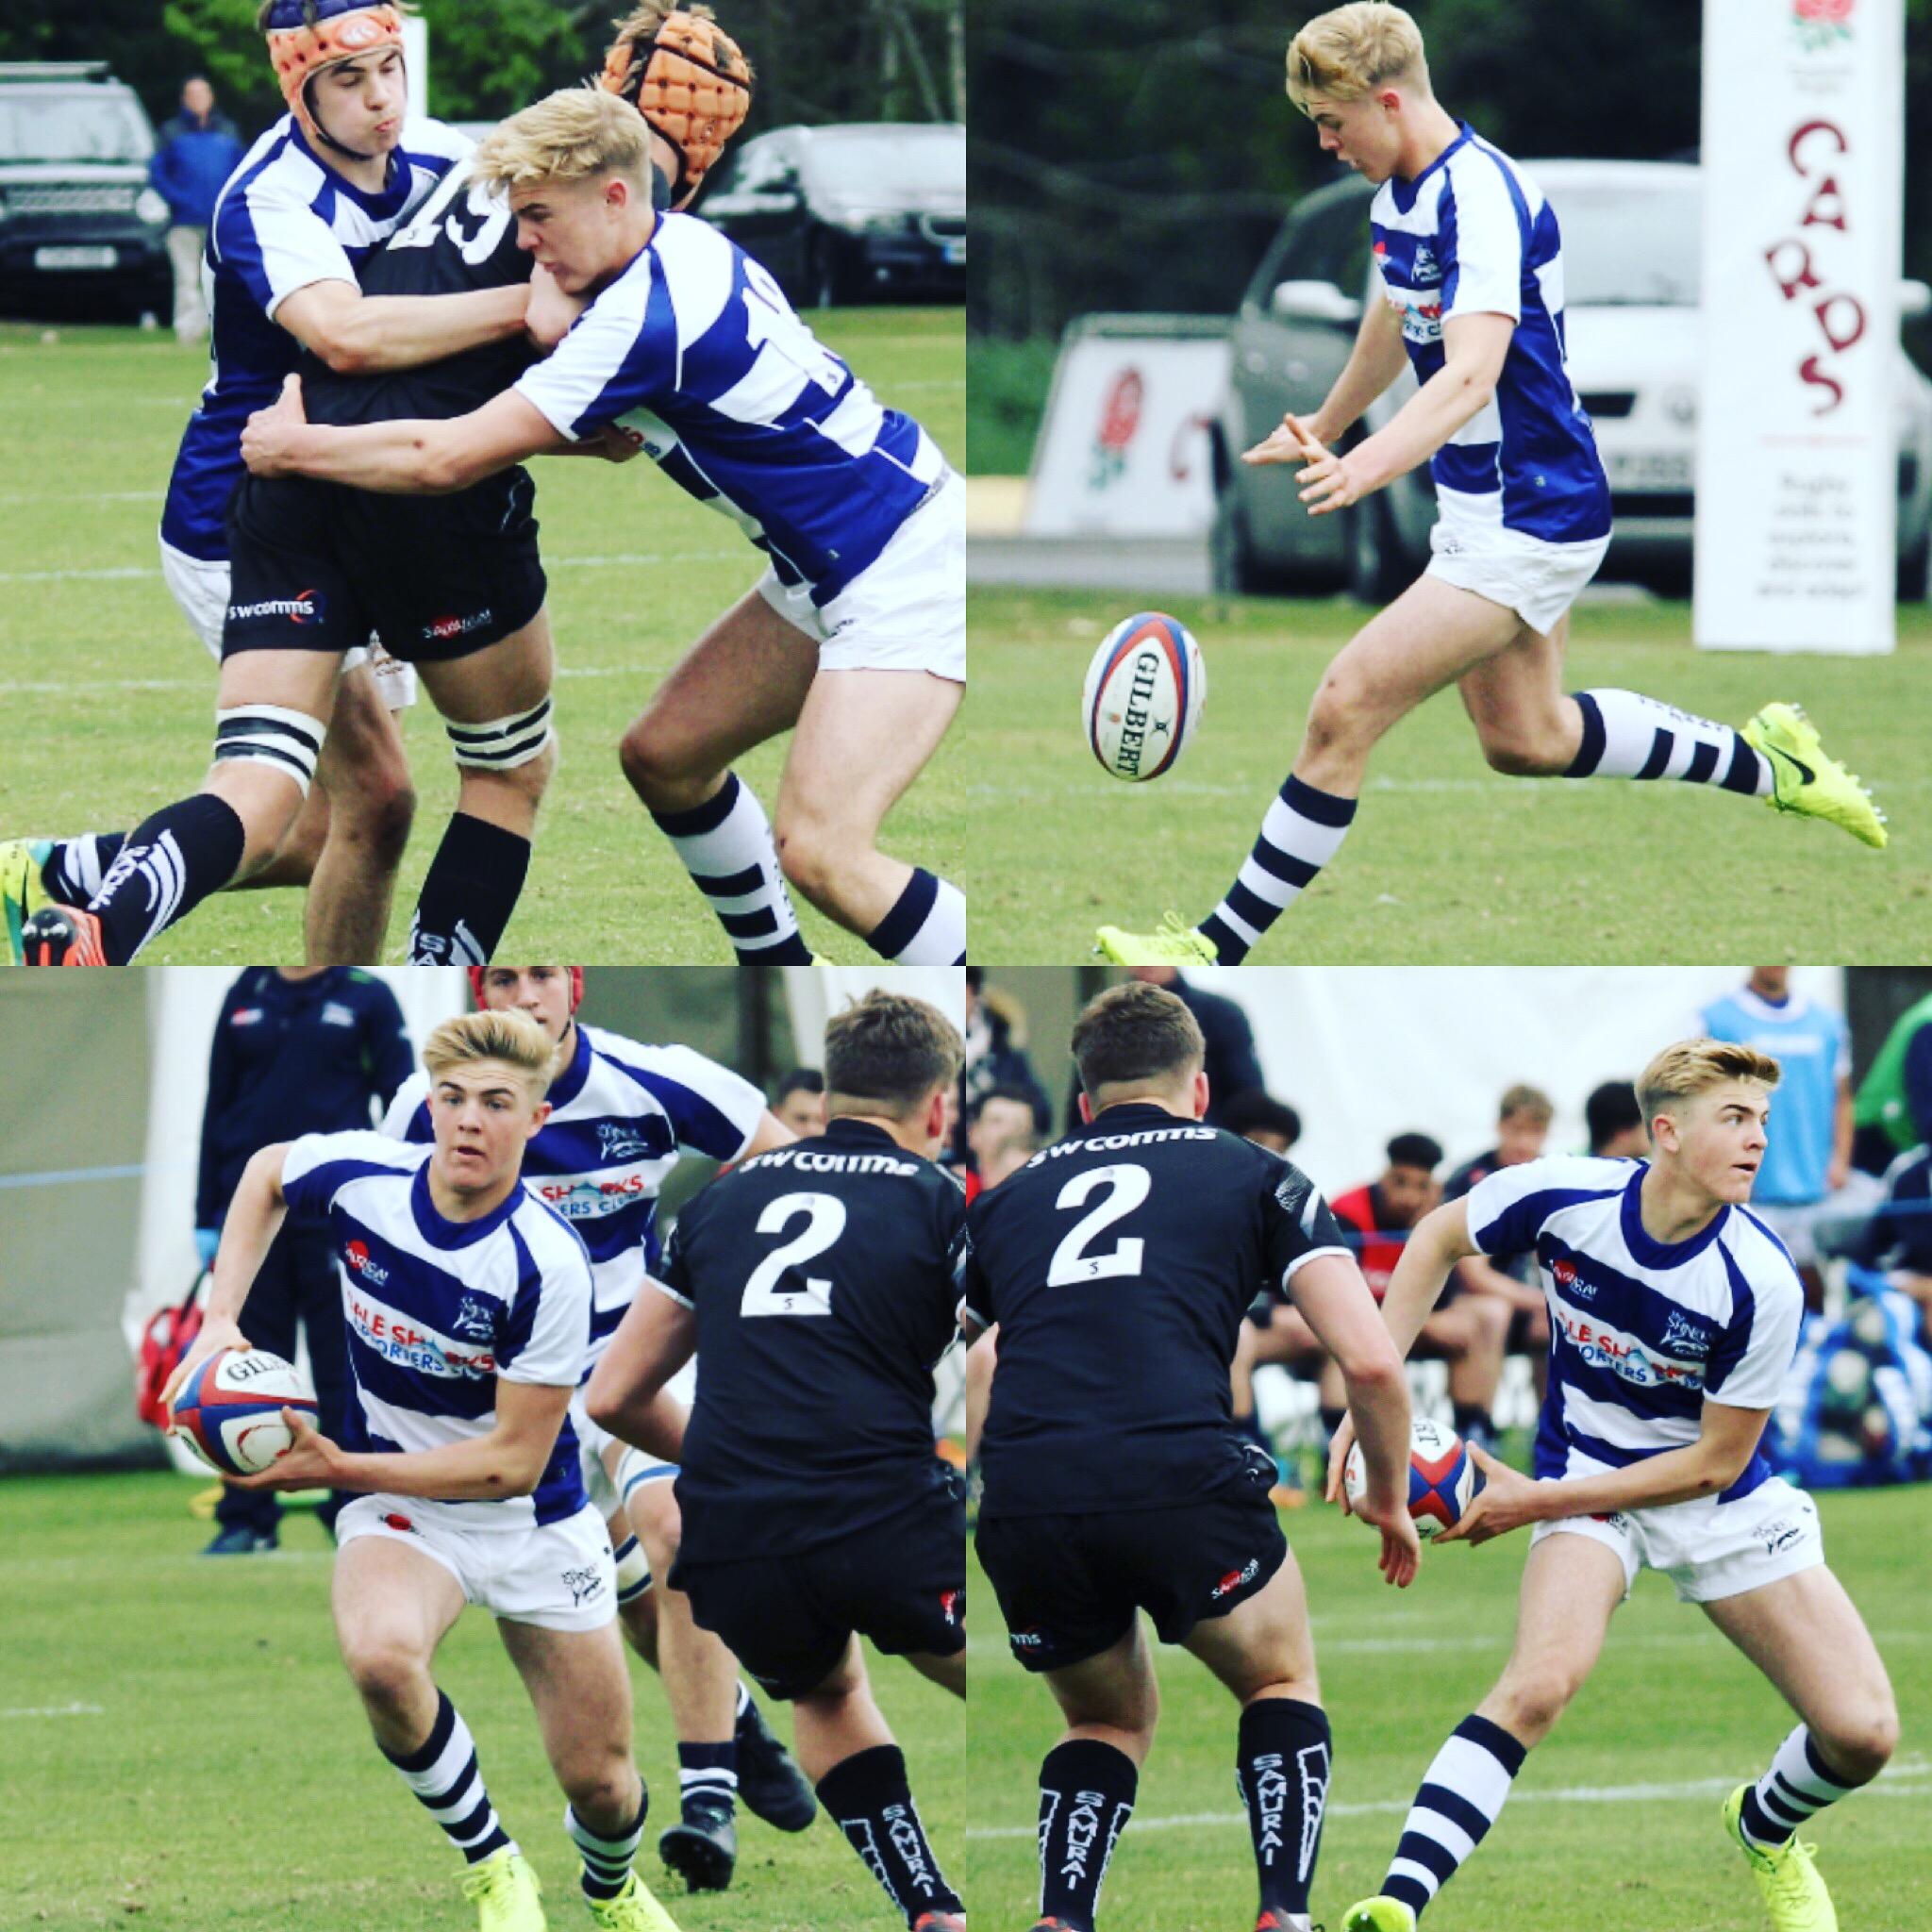 Cheadle hulme school senior student Tom curtis plays rugby for Sale Sharks Academy U16s and will play for the U18s next season